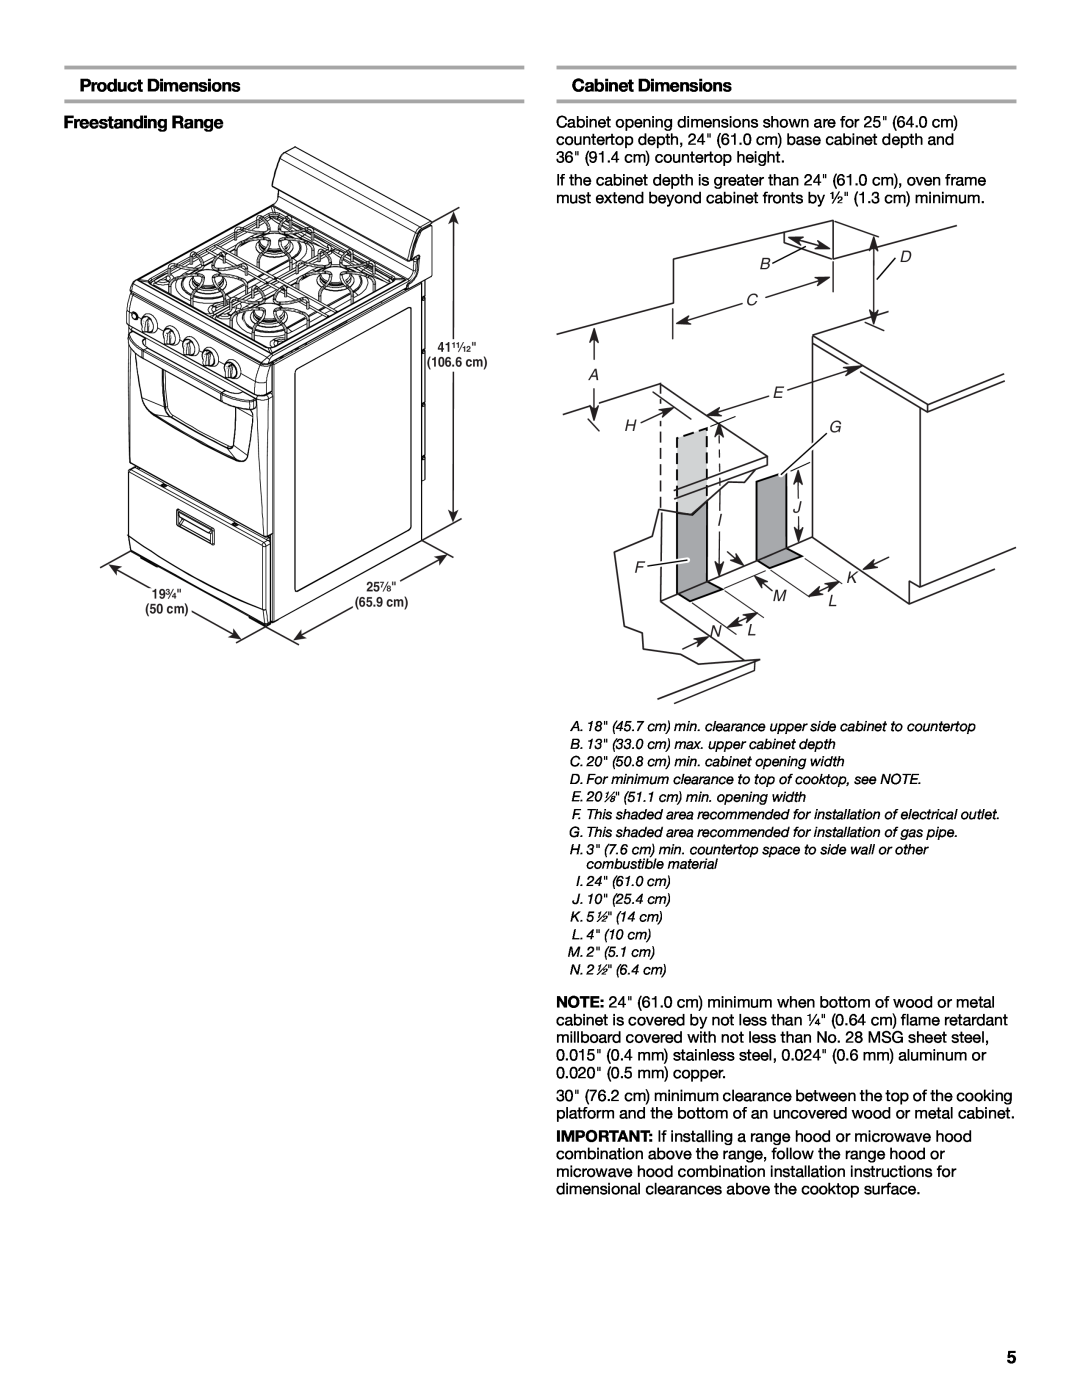 Whirlpool W10459123B installation instructions Product Dimensions, Cabinet Dimensions, Freestanding Range 